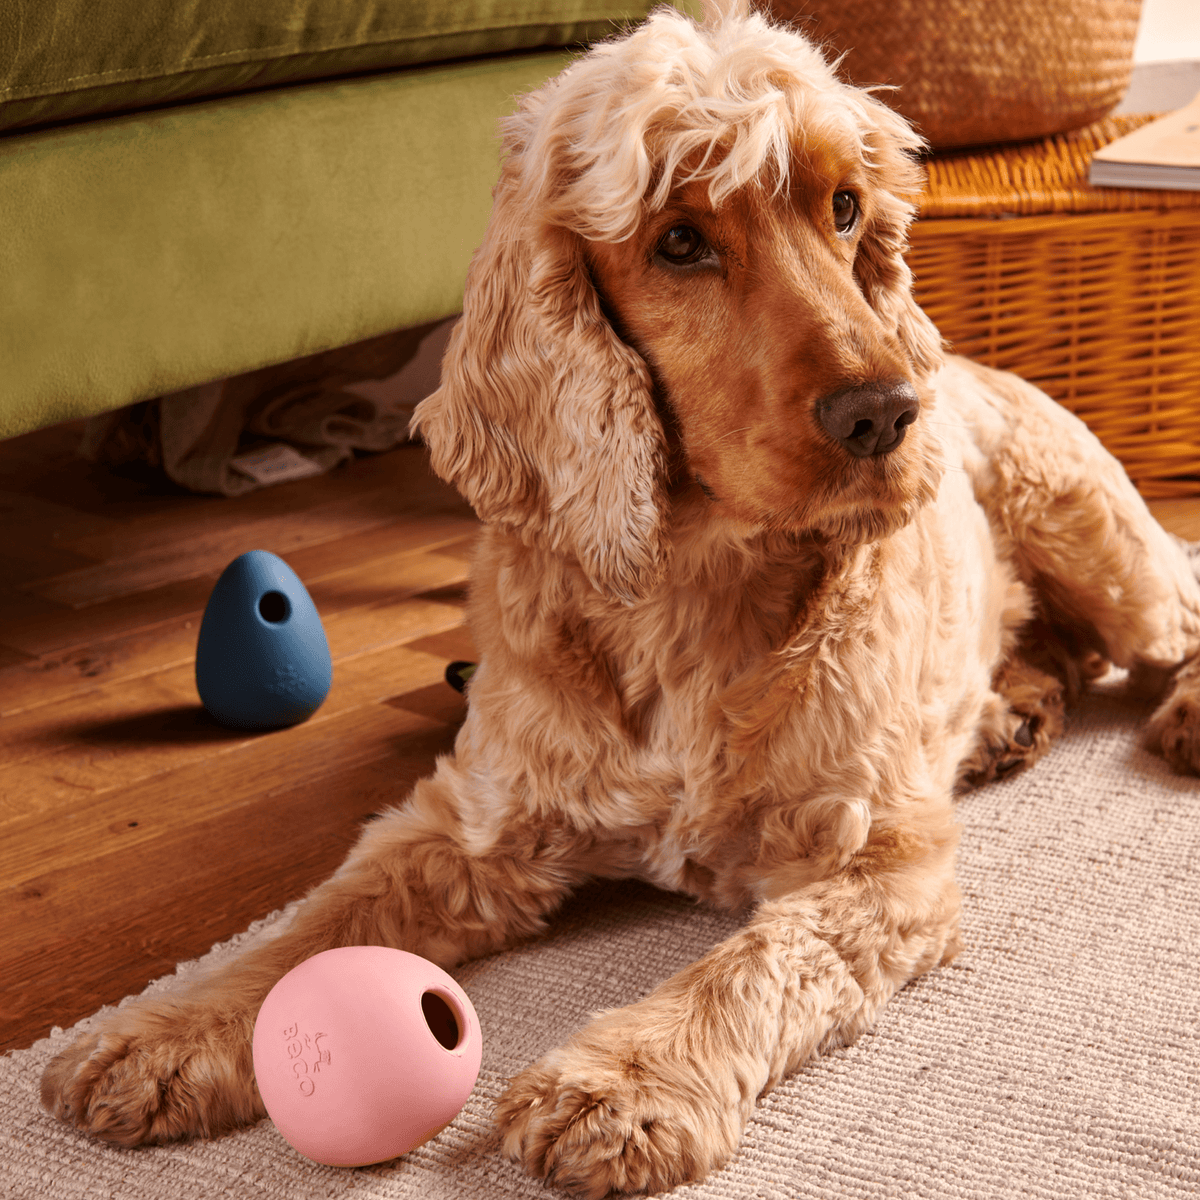 Natural Rubber Boredom Buster  BECO - Love your dog, love our planet – Beco